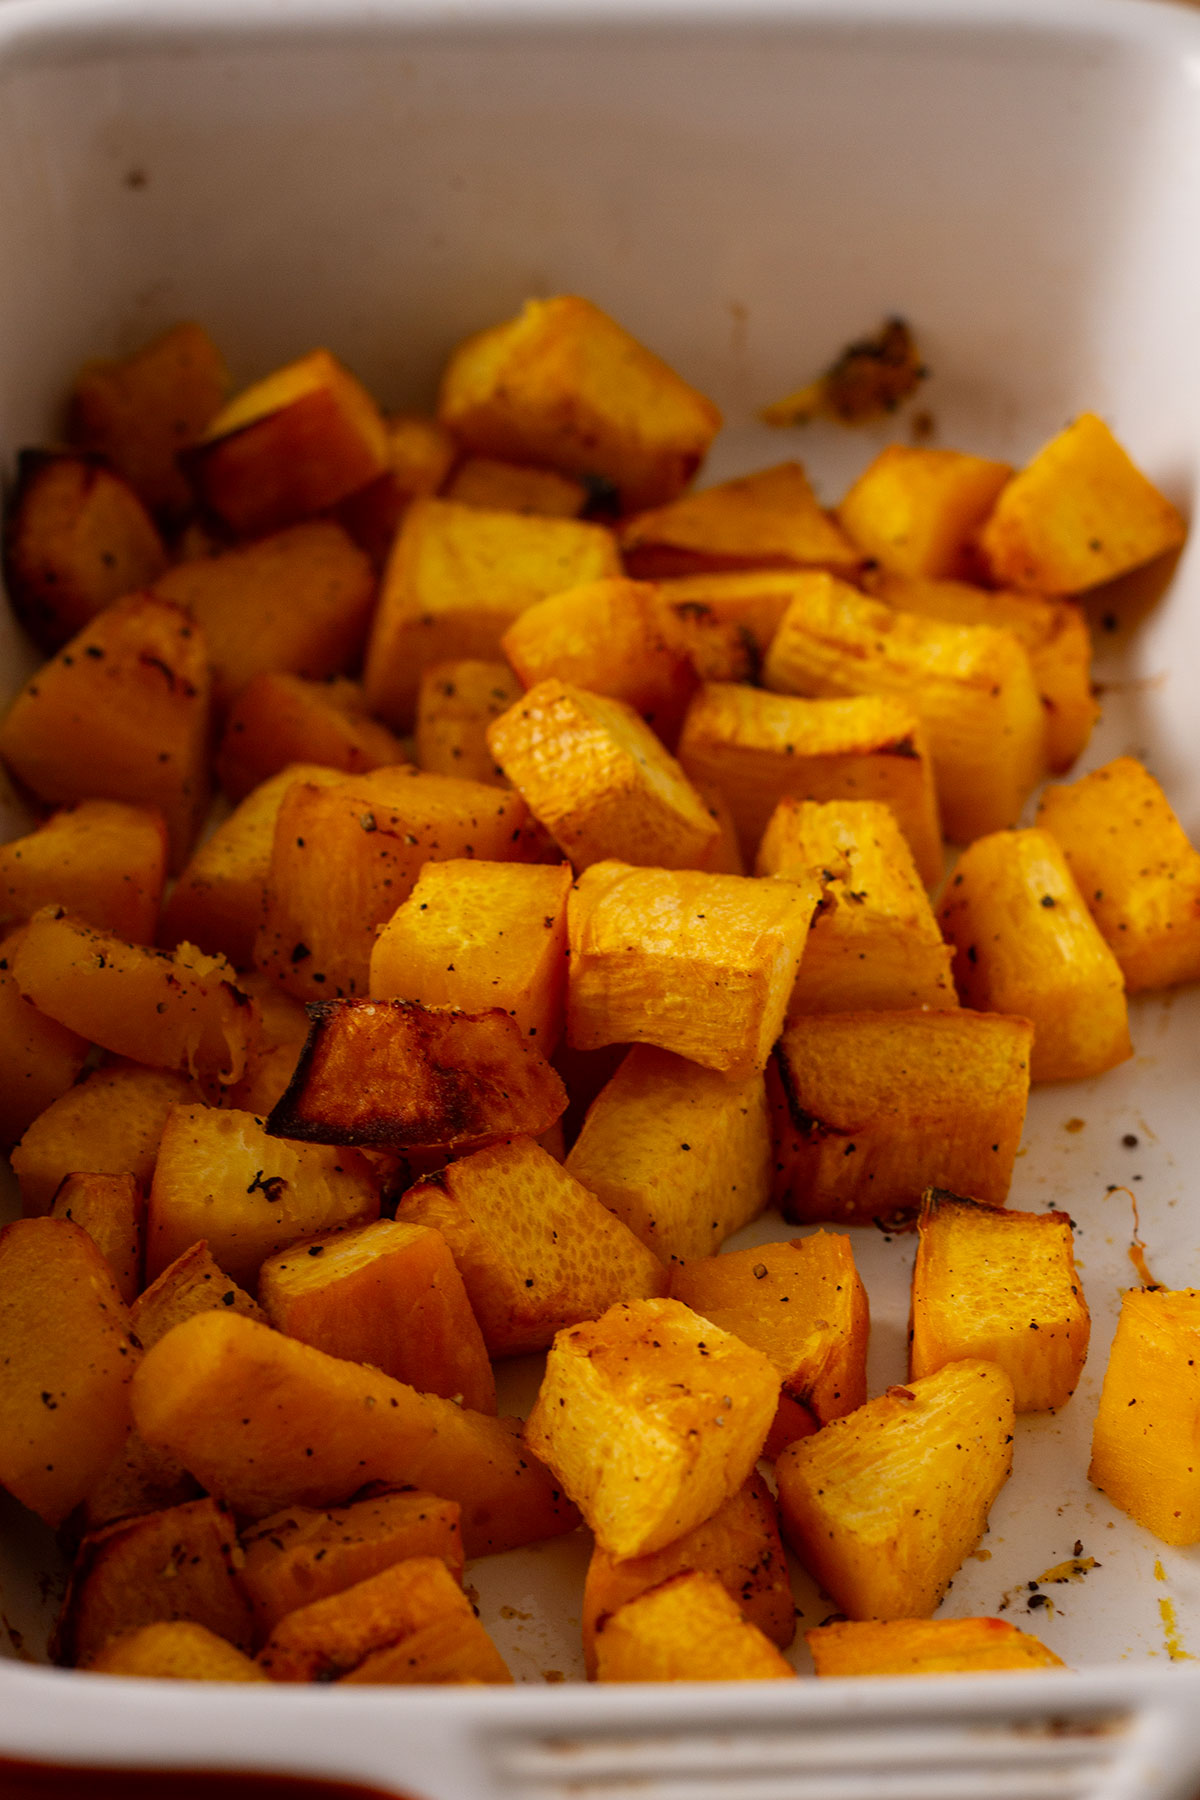 The roasted 1 inch cubes of pumpkin in a white bowl.